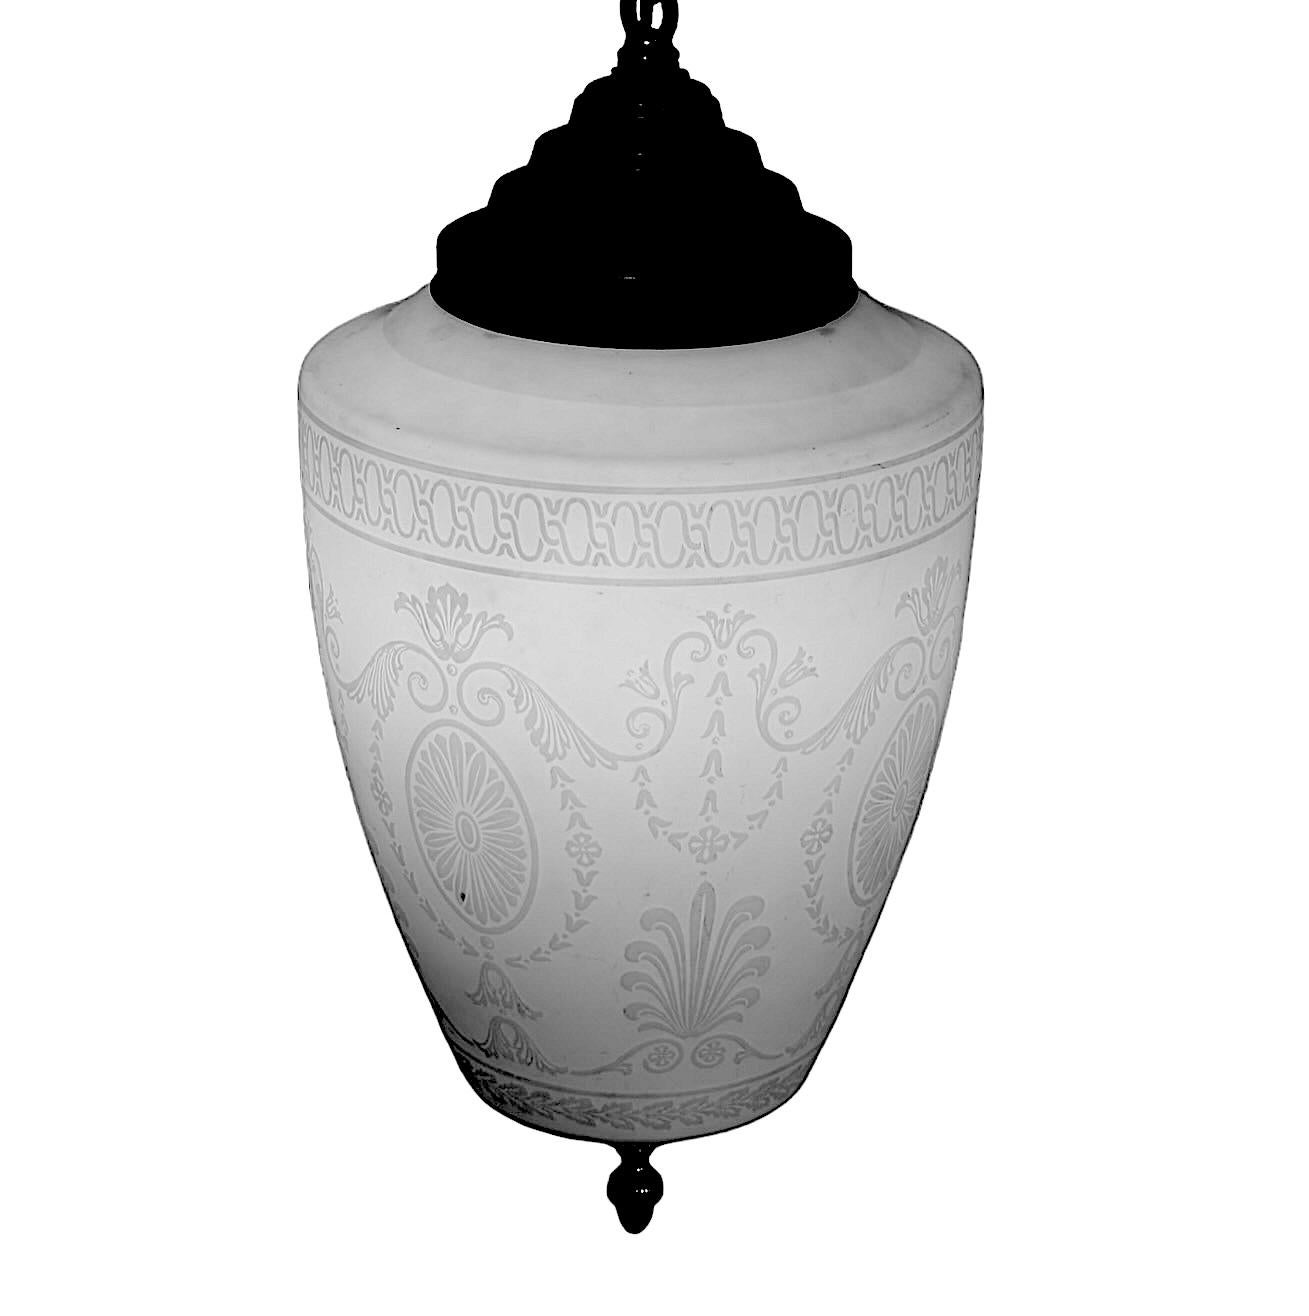 Elegant classical design calcite glass pendant, attributed to Frederick Carder for Steuben, c 1900/1920’s.
The glass globe features an acid cut  back surface, with a classical urn and swag motif, which mounts into the original vintage canopy.
The